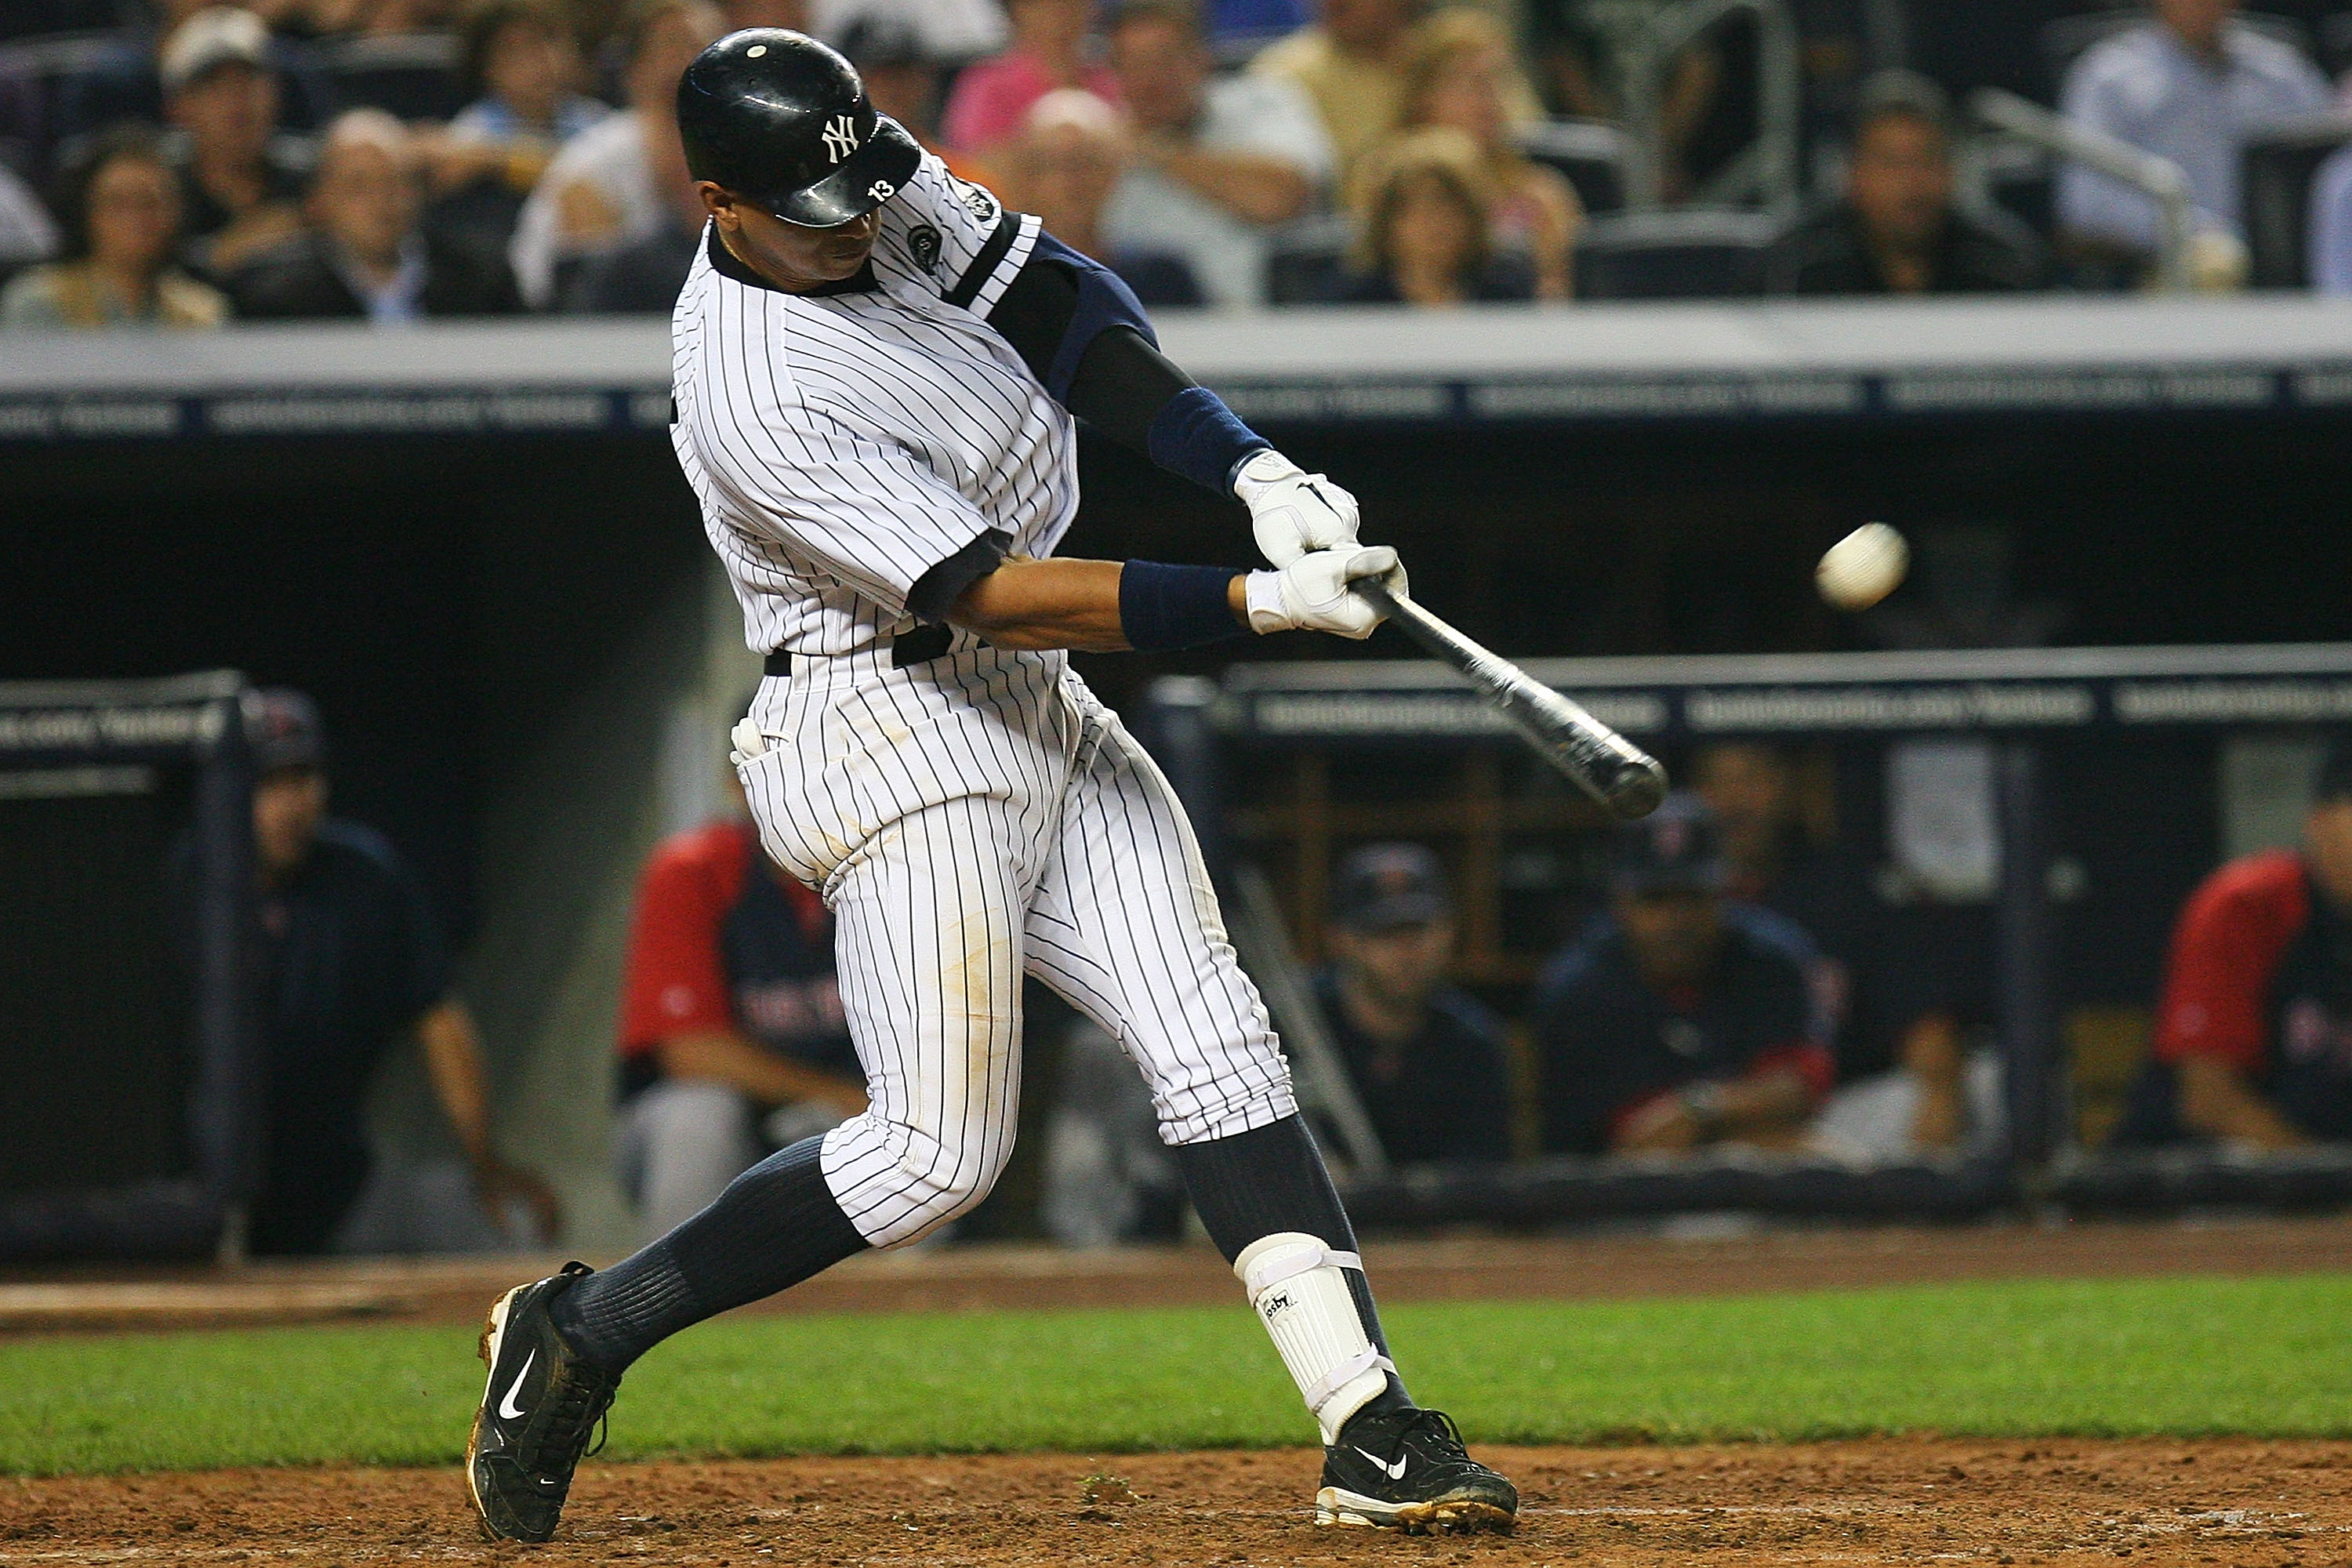 NEW YORK - SEPTEMBER 24:  Alex Rodriguez #13 of the New York Yankees hits a homerun in the sixth inning against the Boston Red Sox on September 24, 2010 at Yankee Stadium in the Bronx borough of New York City.  (Photo by Andrew Burton/Getty Images)